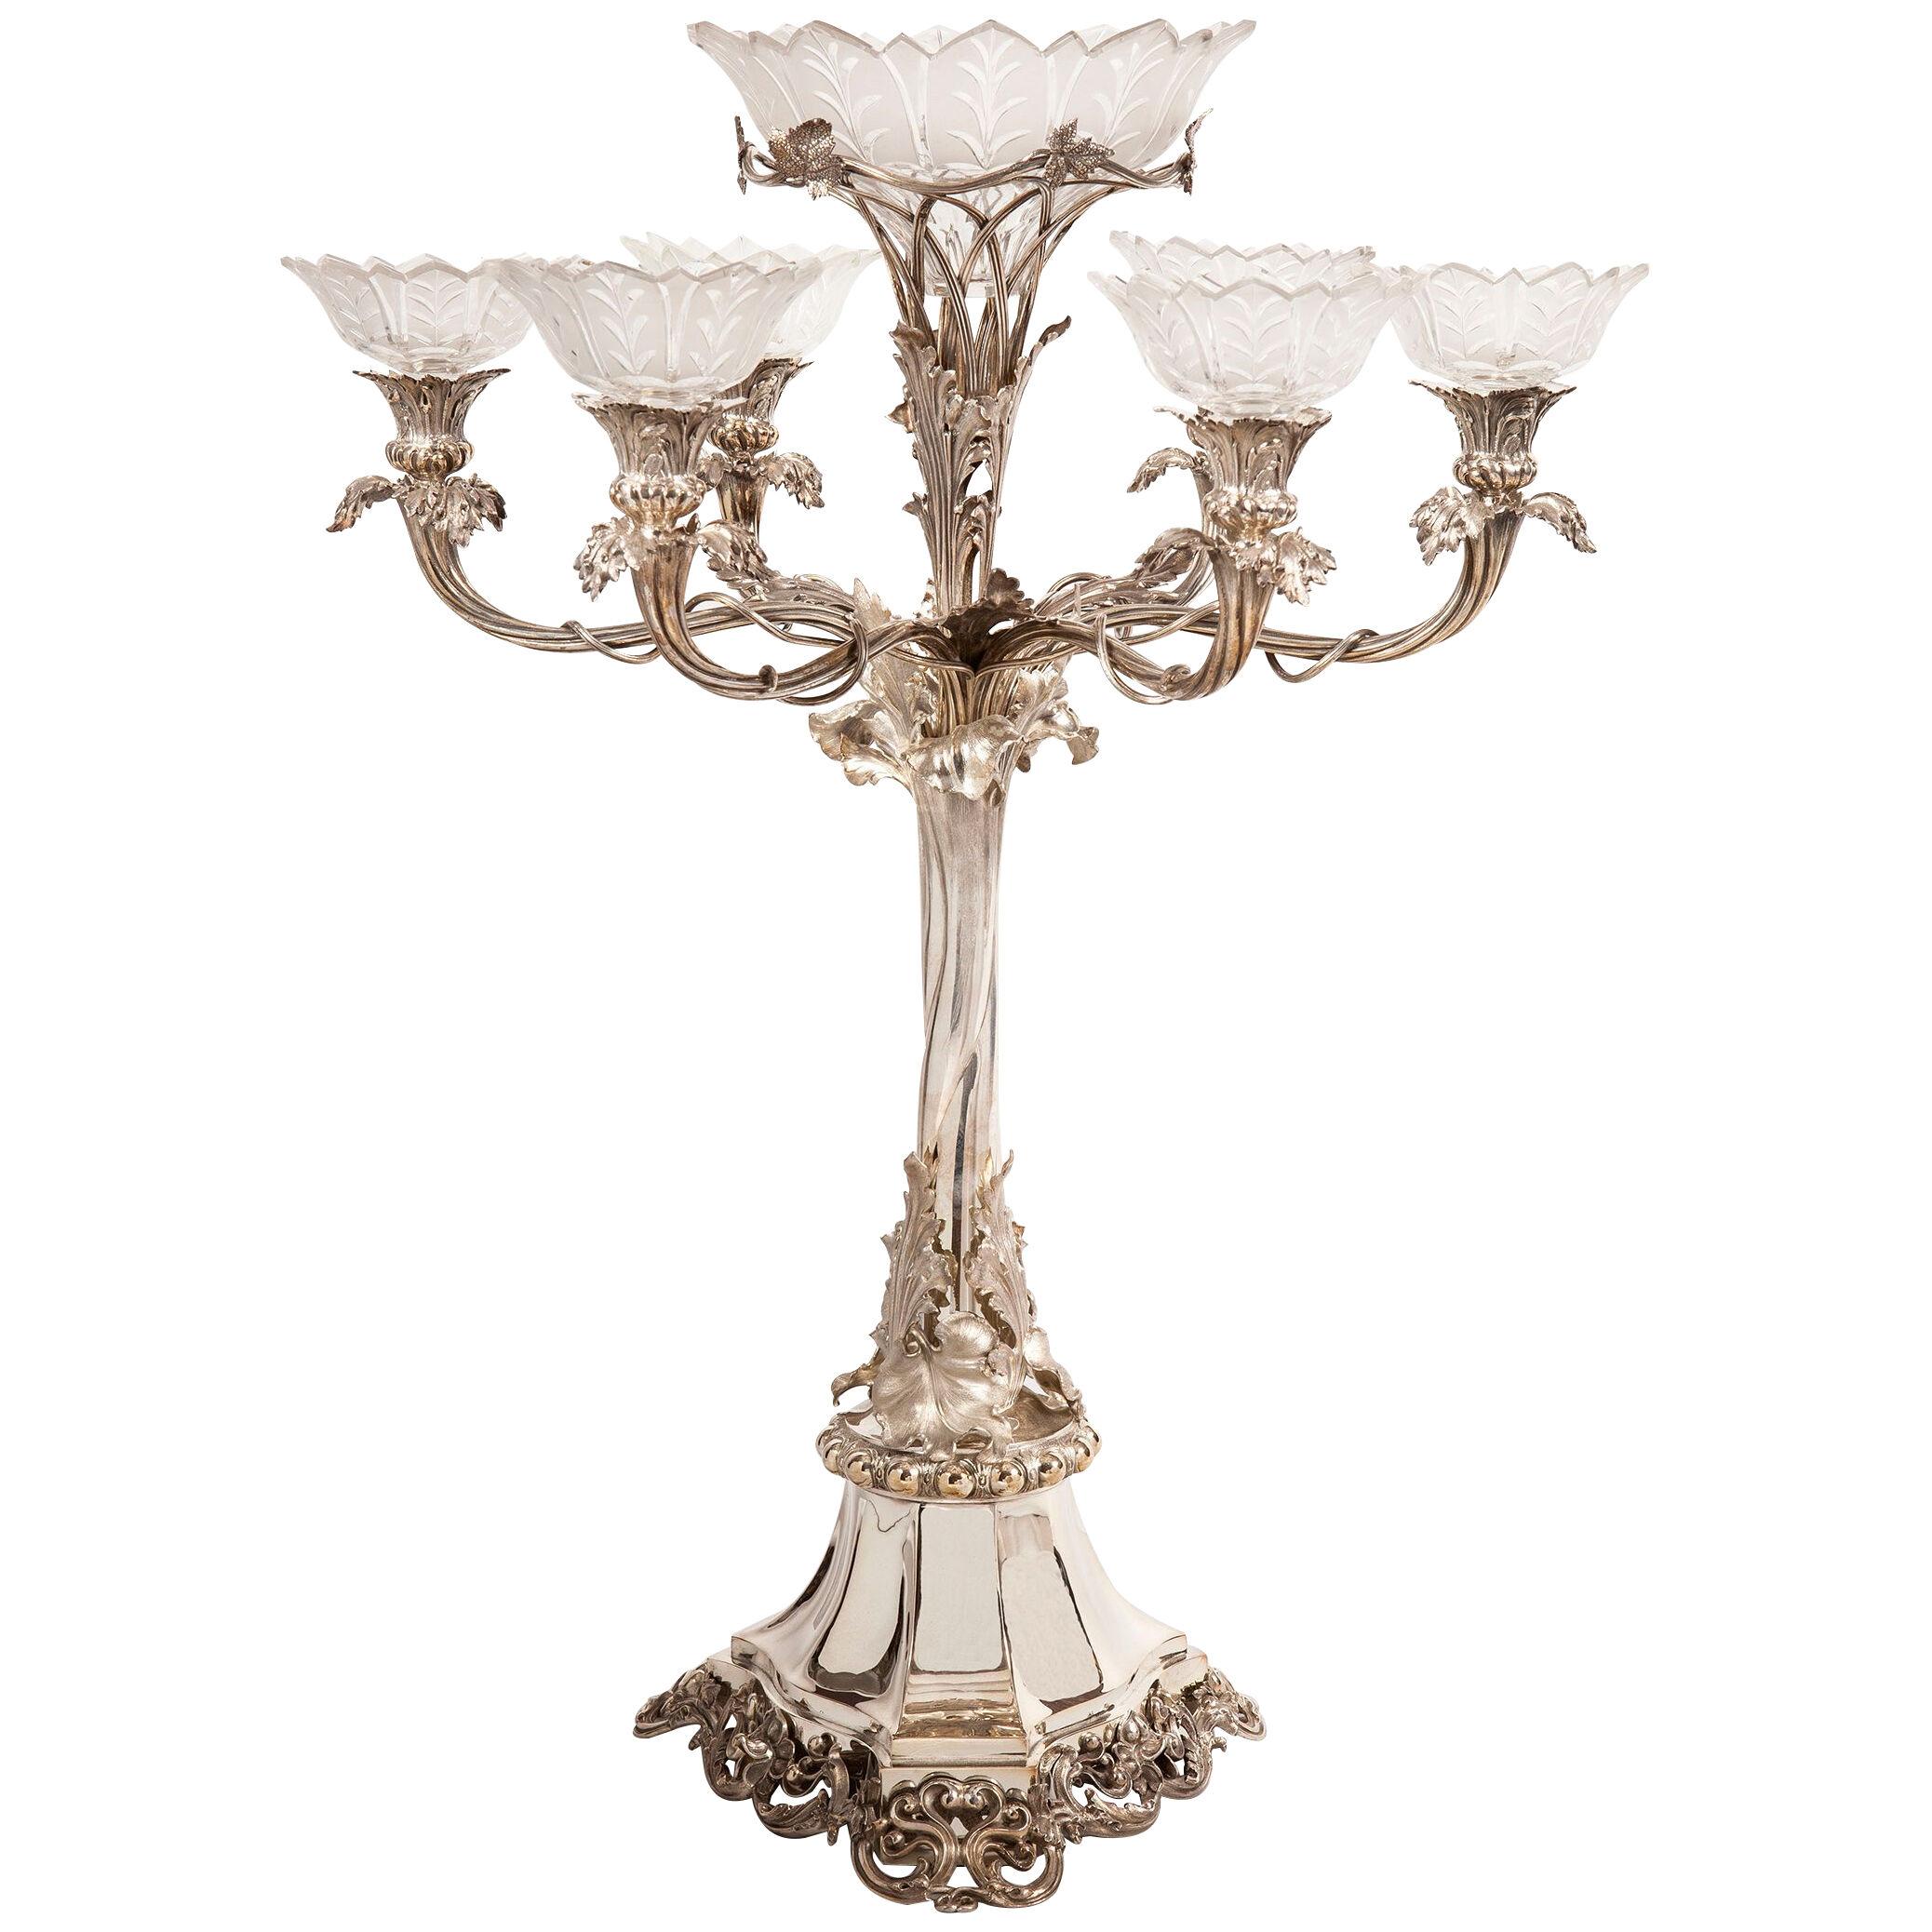 Mid-19th Century Sterling Silver Centrepiece